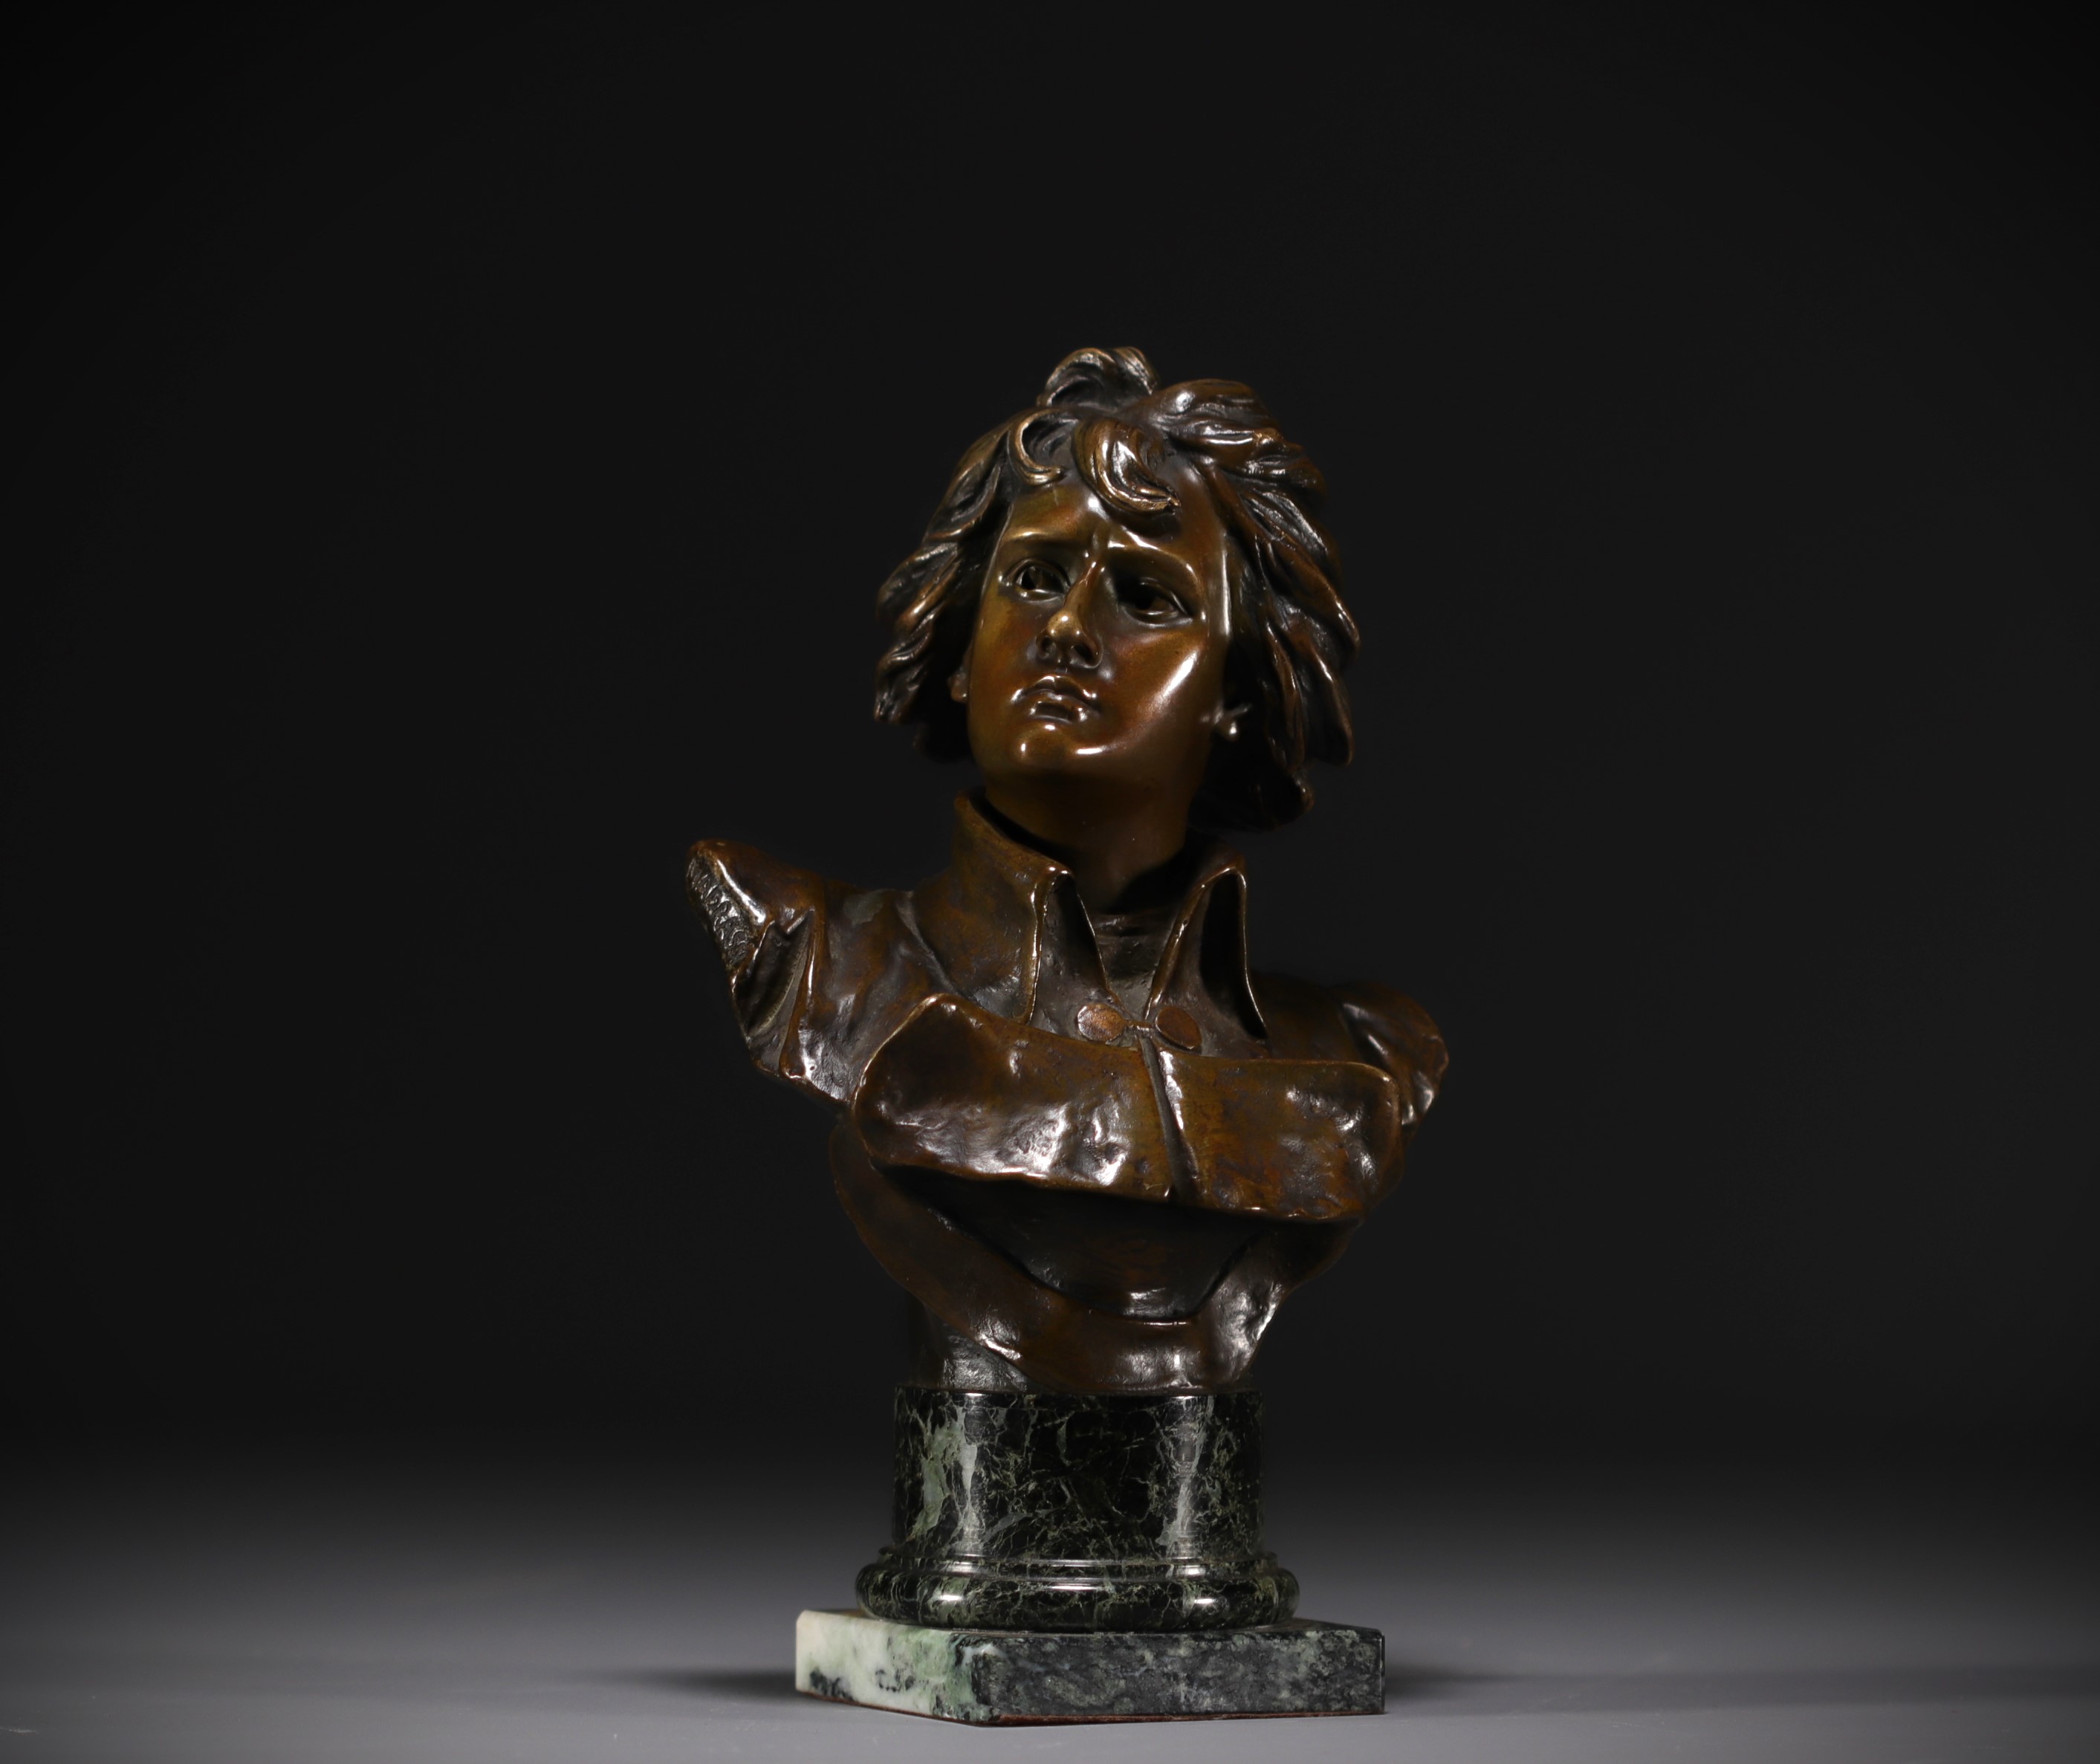 Lucas MADRASSI (1848-1919) "Young Napoleon Bonaparte" Bust in bronze with brown patina.